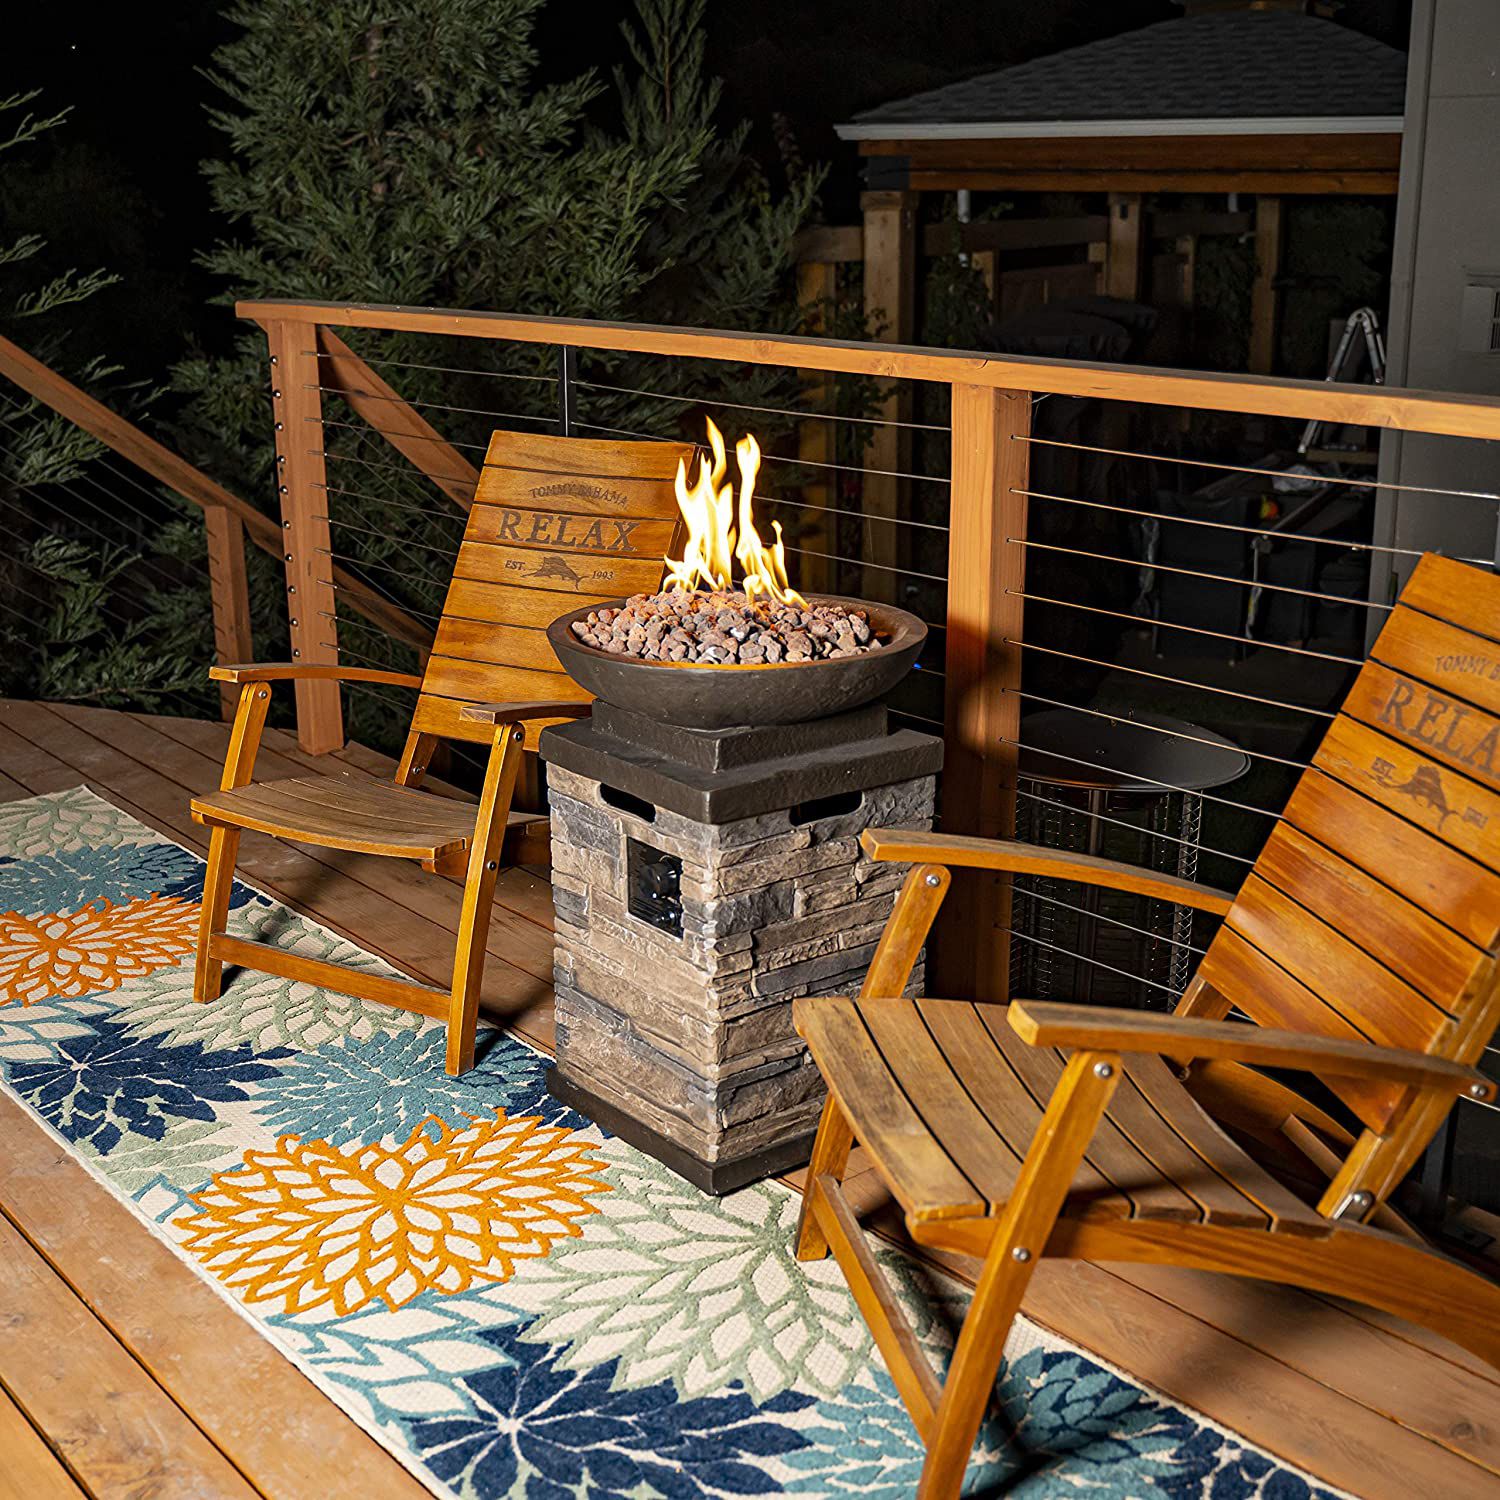 Fire Pits In Stock Now To Extend Your Outdoor Patio Time Well Into Fall During Pandemic Cleveland Com